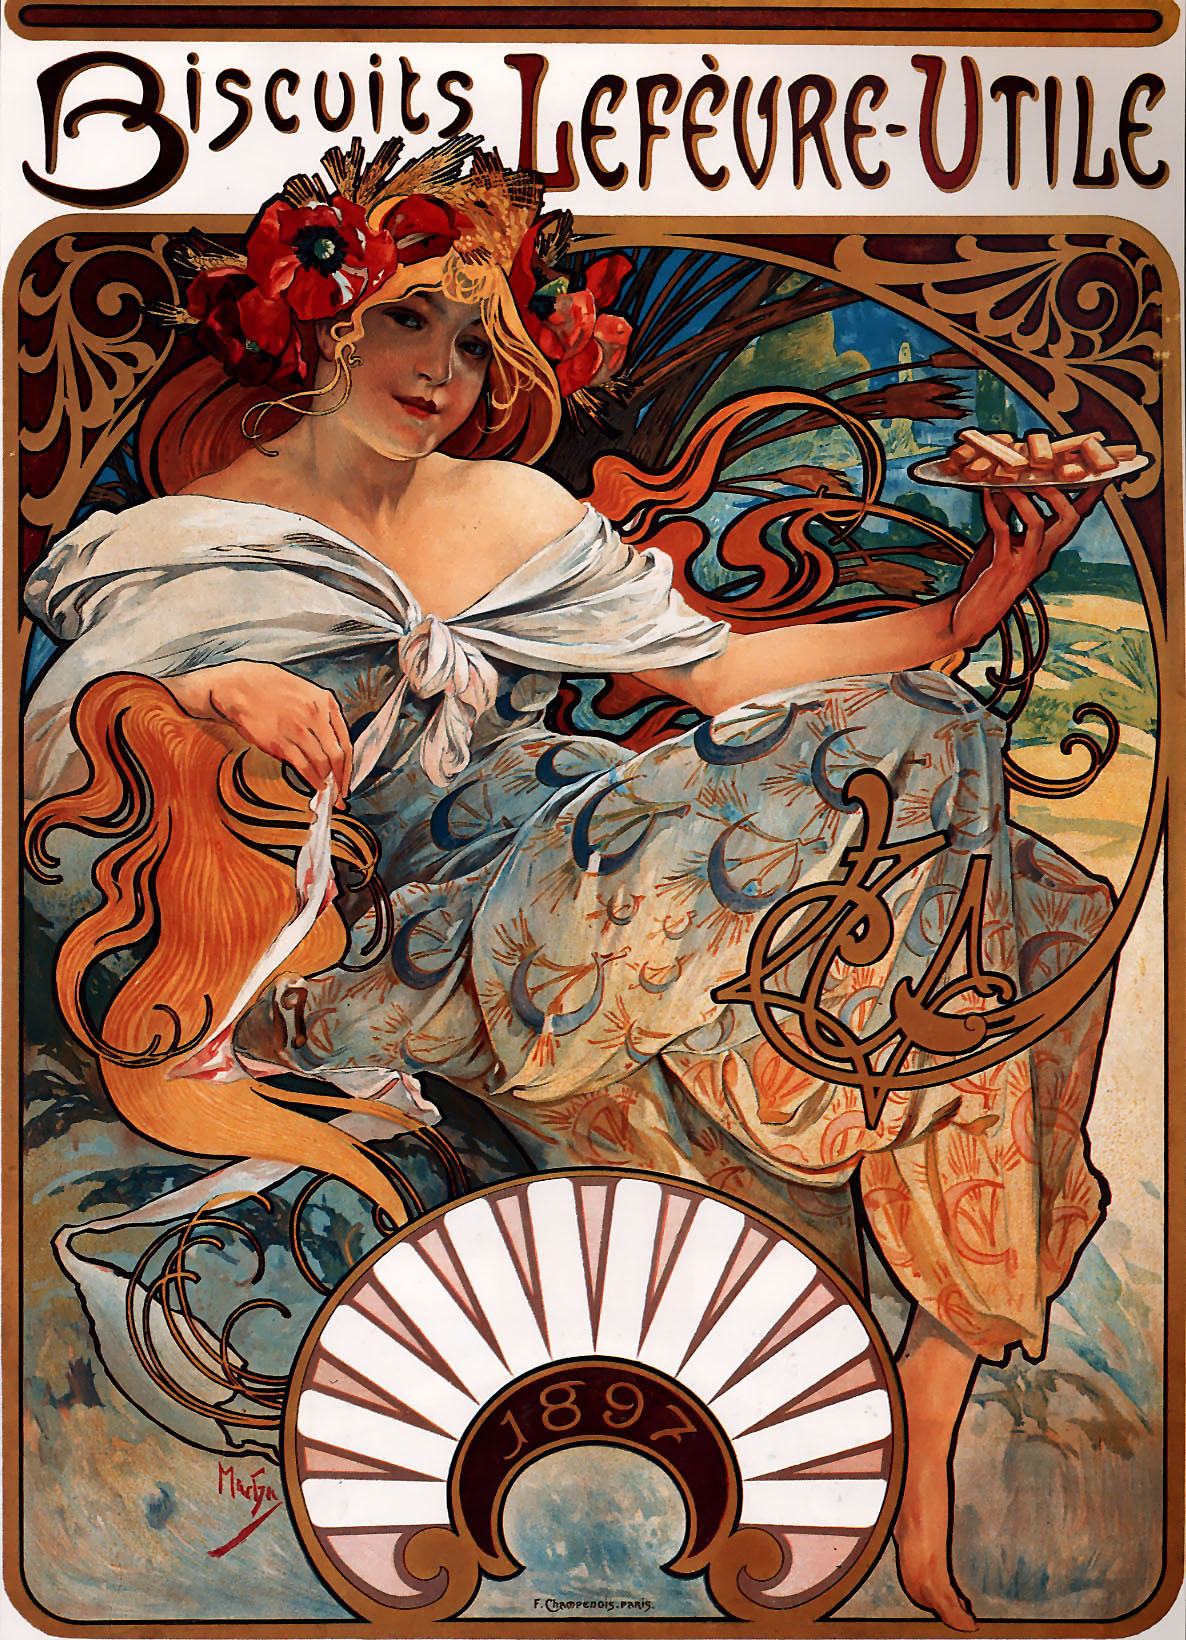 Biscuits Lefèvre-Utile by Alphonse Mucha, 1896